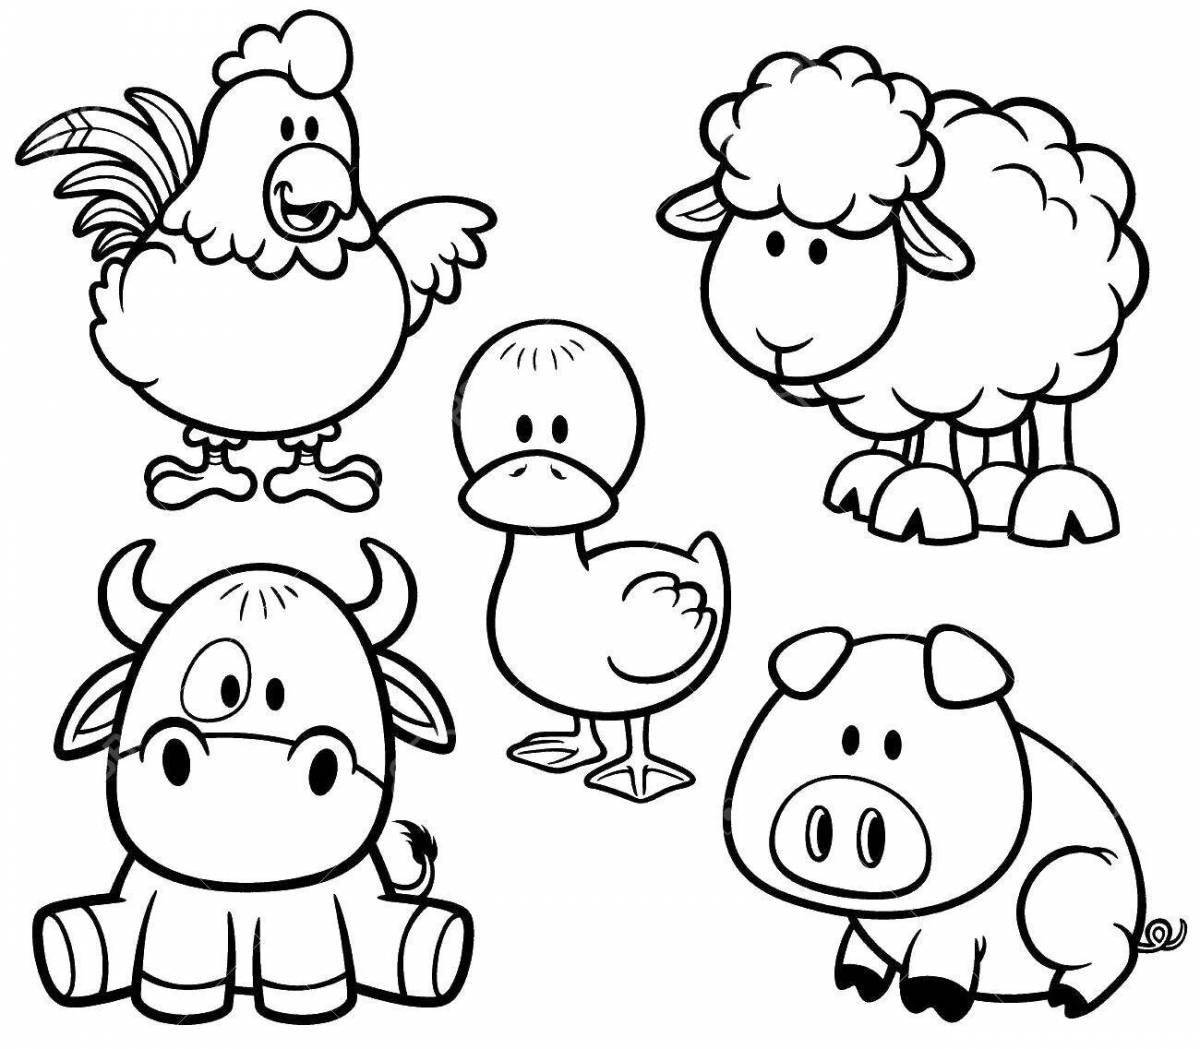 Adorable pets coloring pages